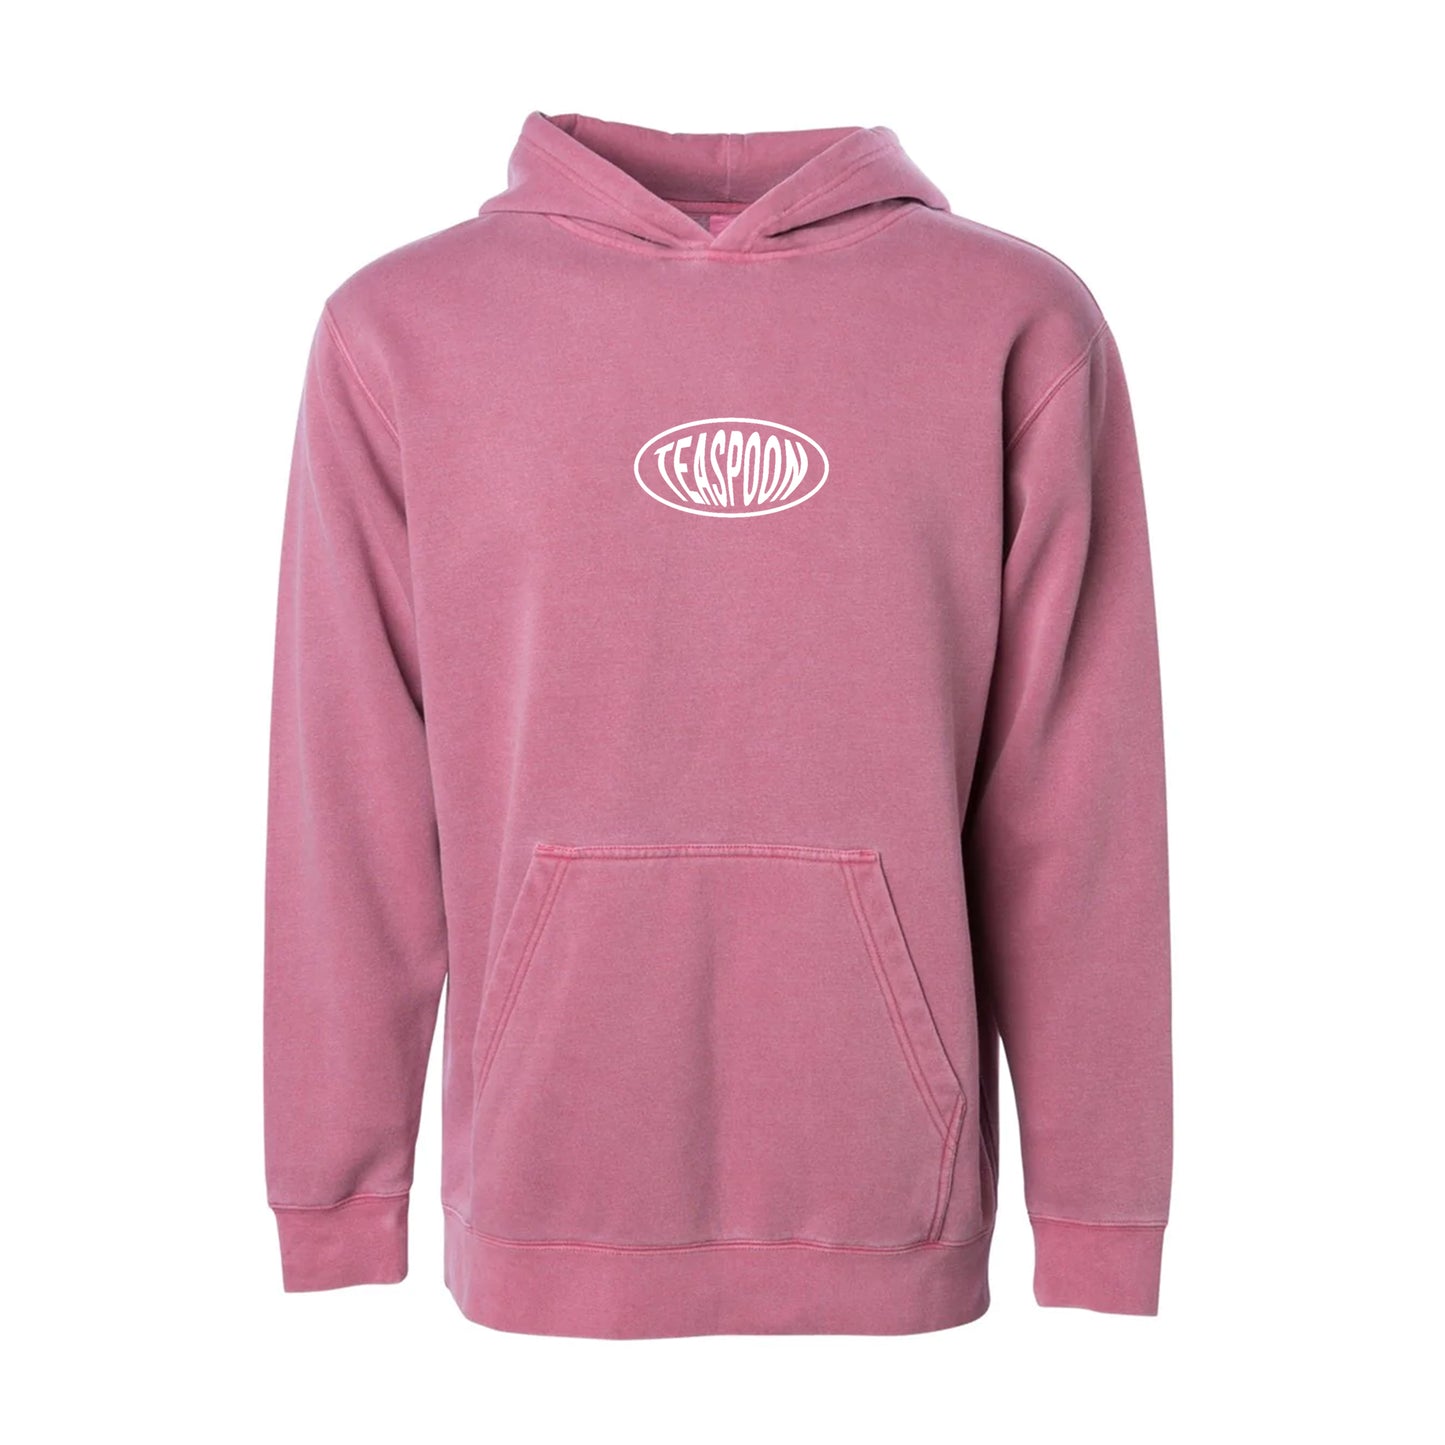 Elipse logo - Faded hoody - pigment Dye - Red